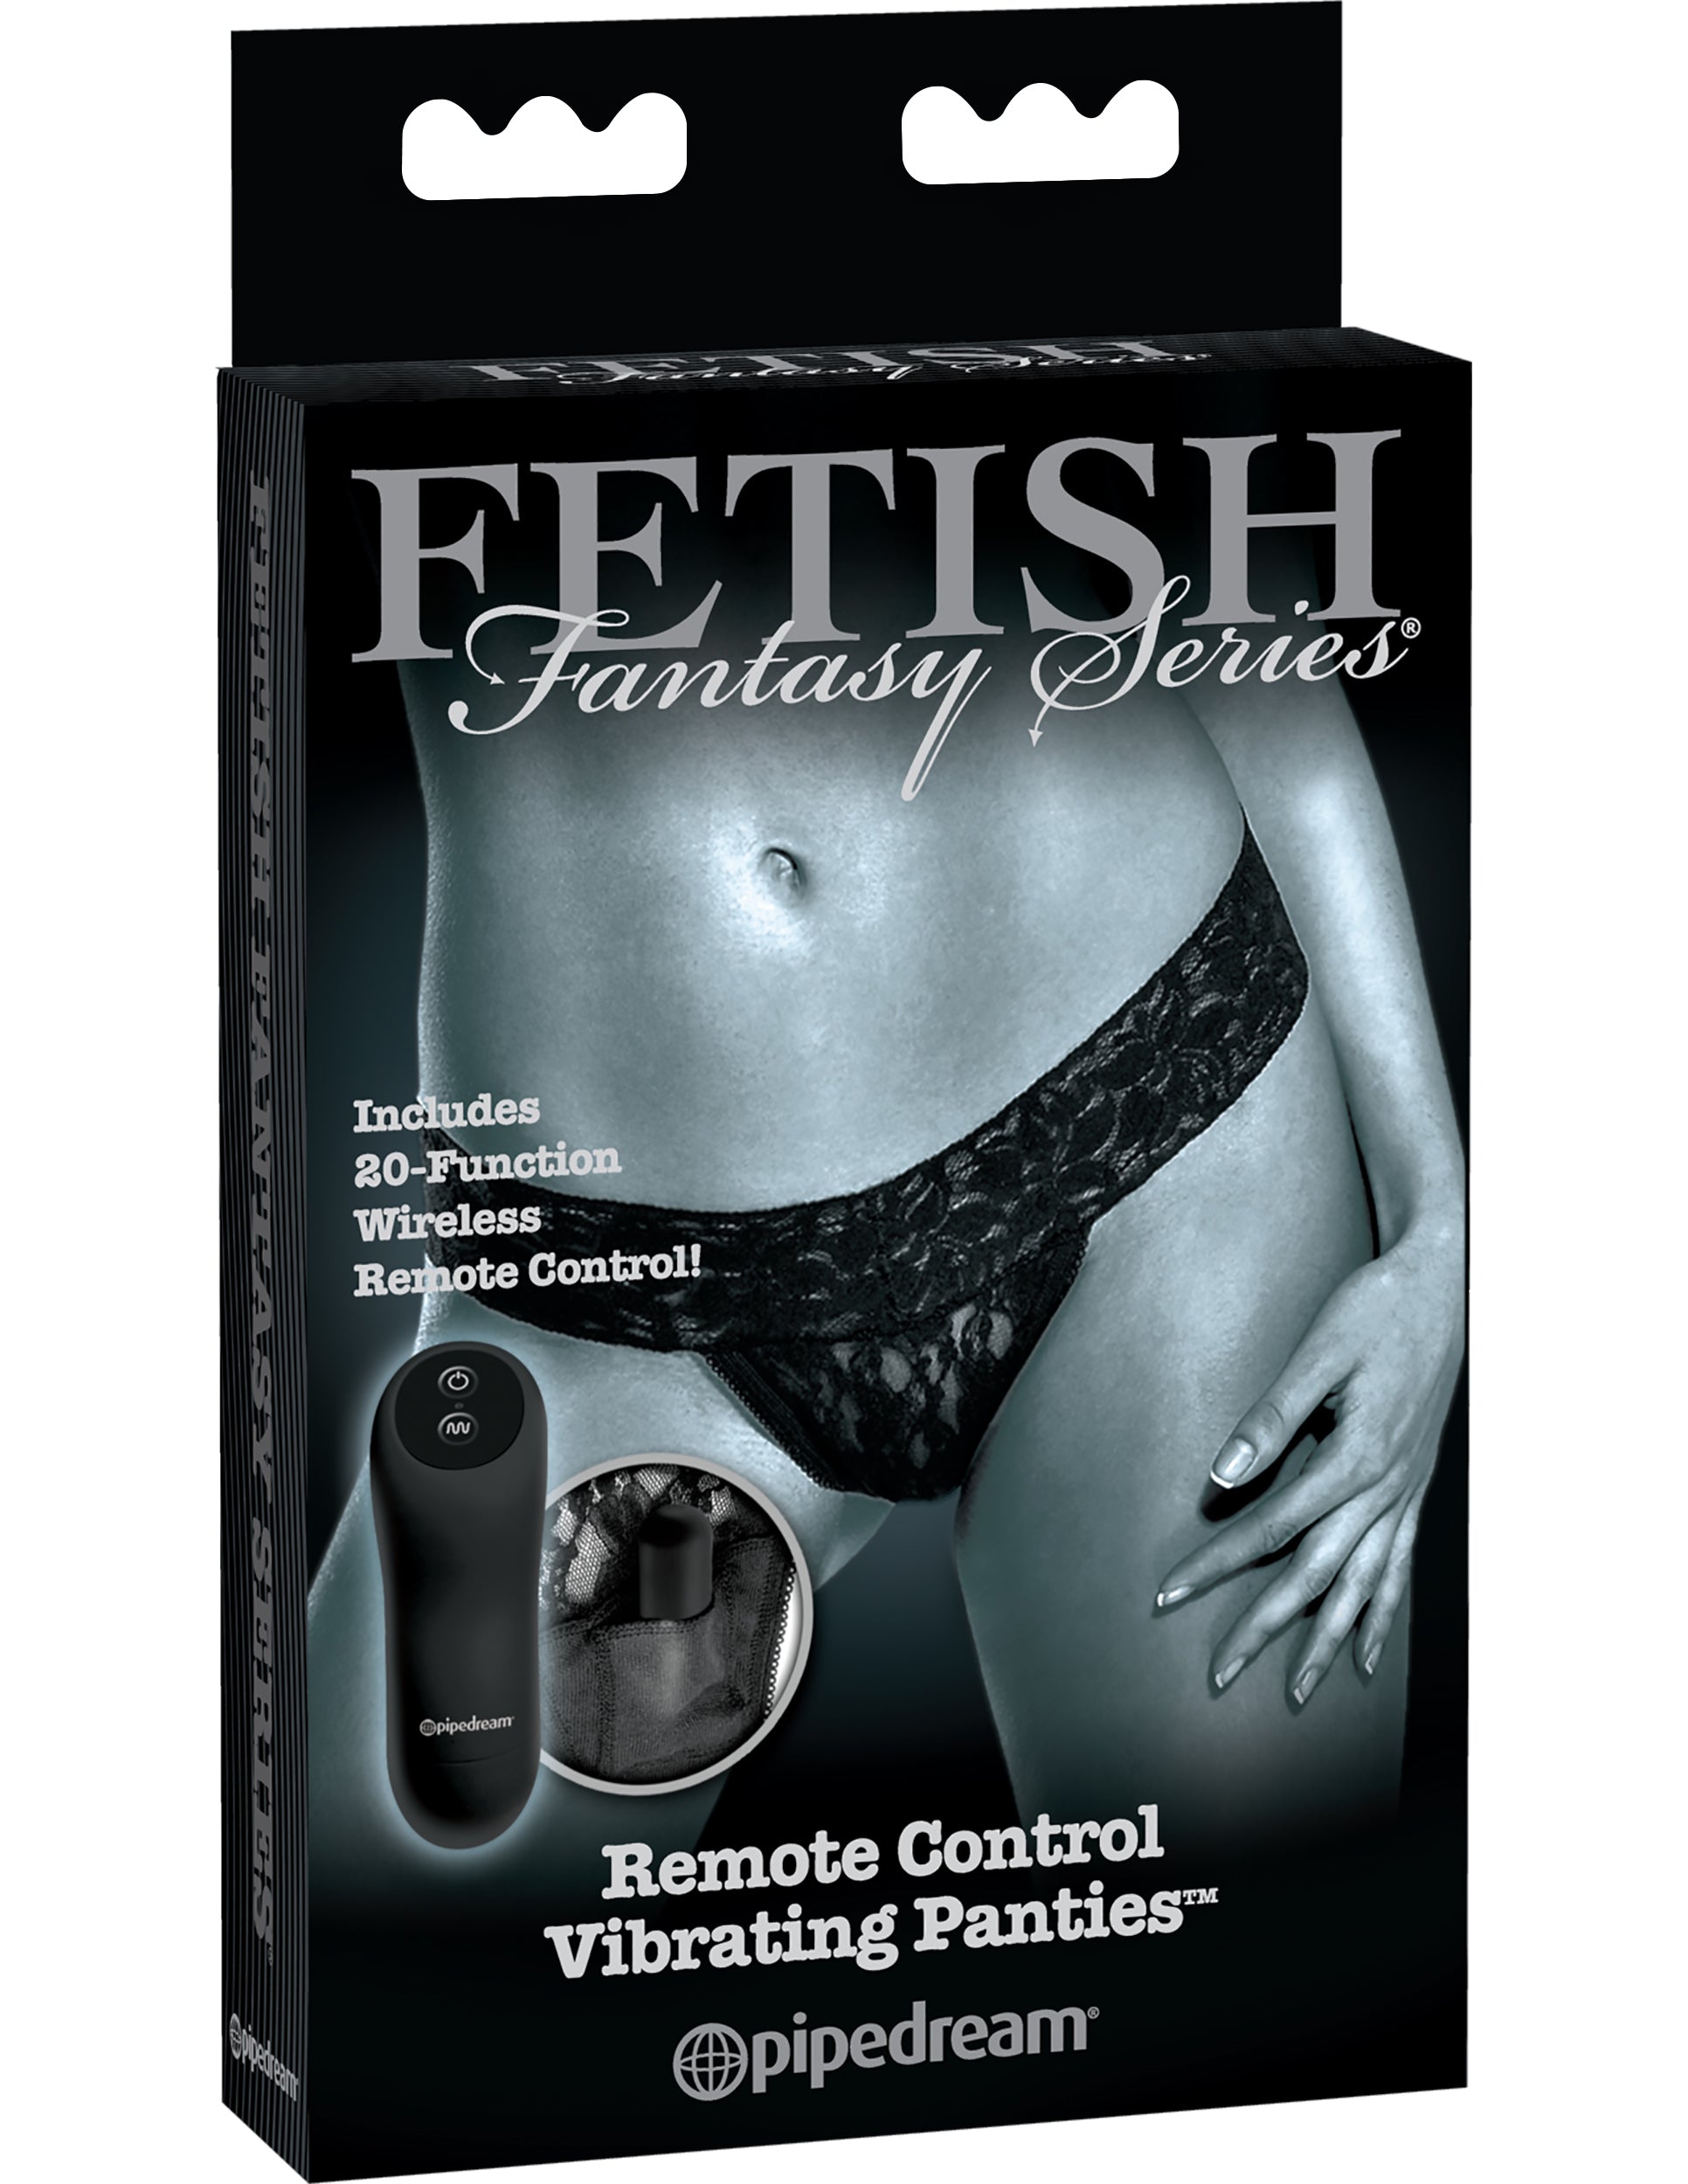 Fetish Fantasy Series Limited Edition - Remote Control Vibrating Panties - Regular Size PD4421-23